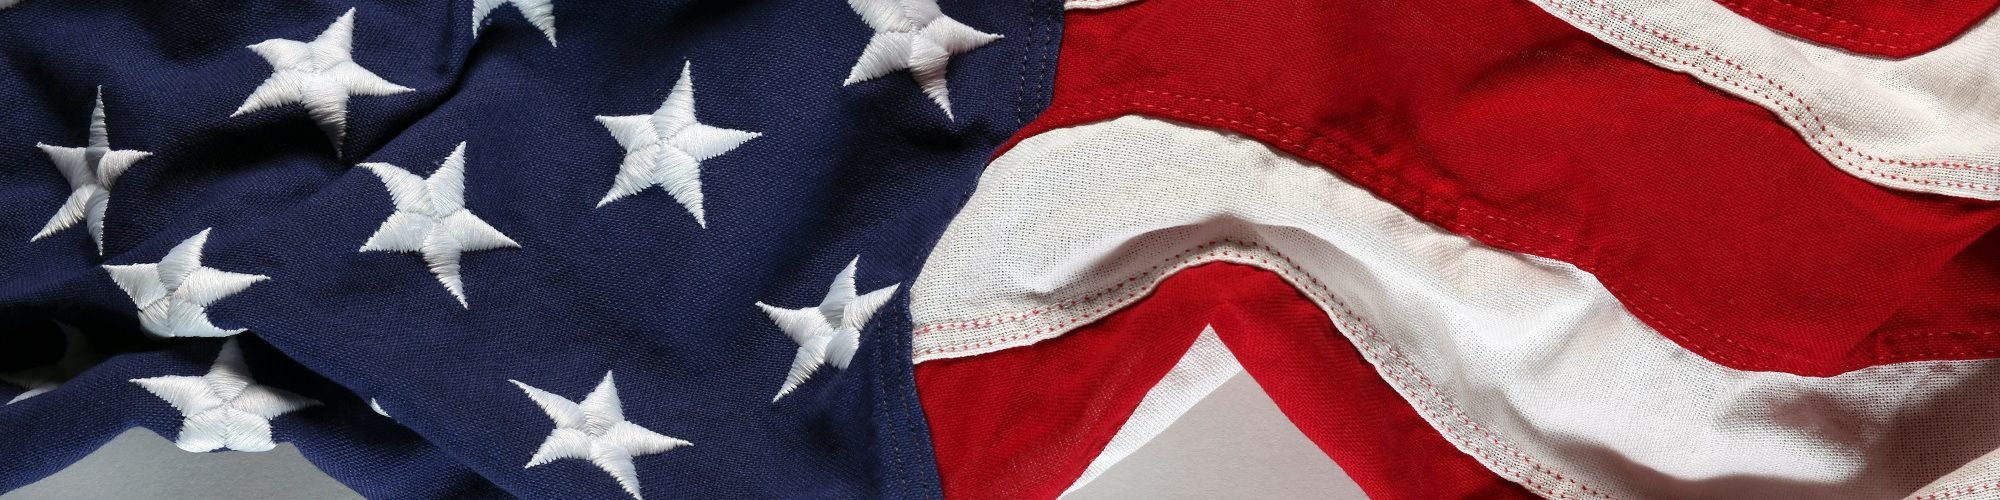 An American Flag waving on a white background for veteran's day